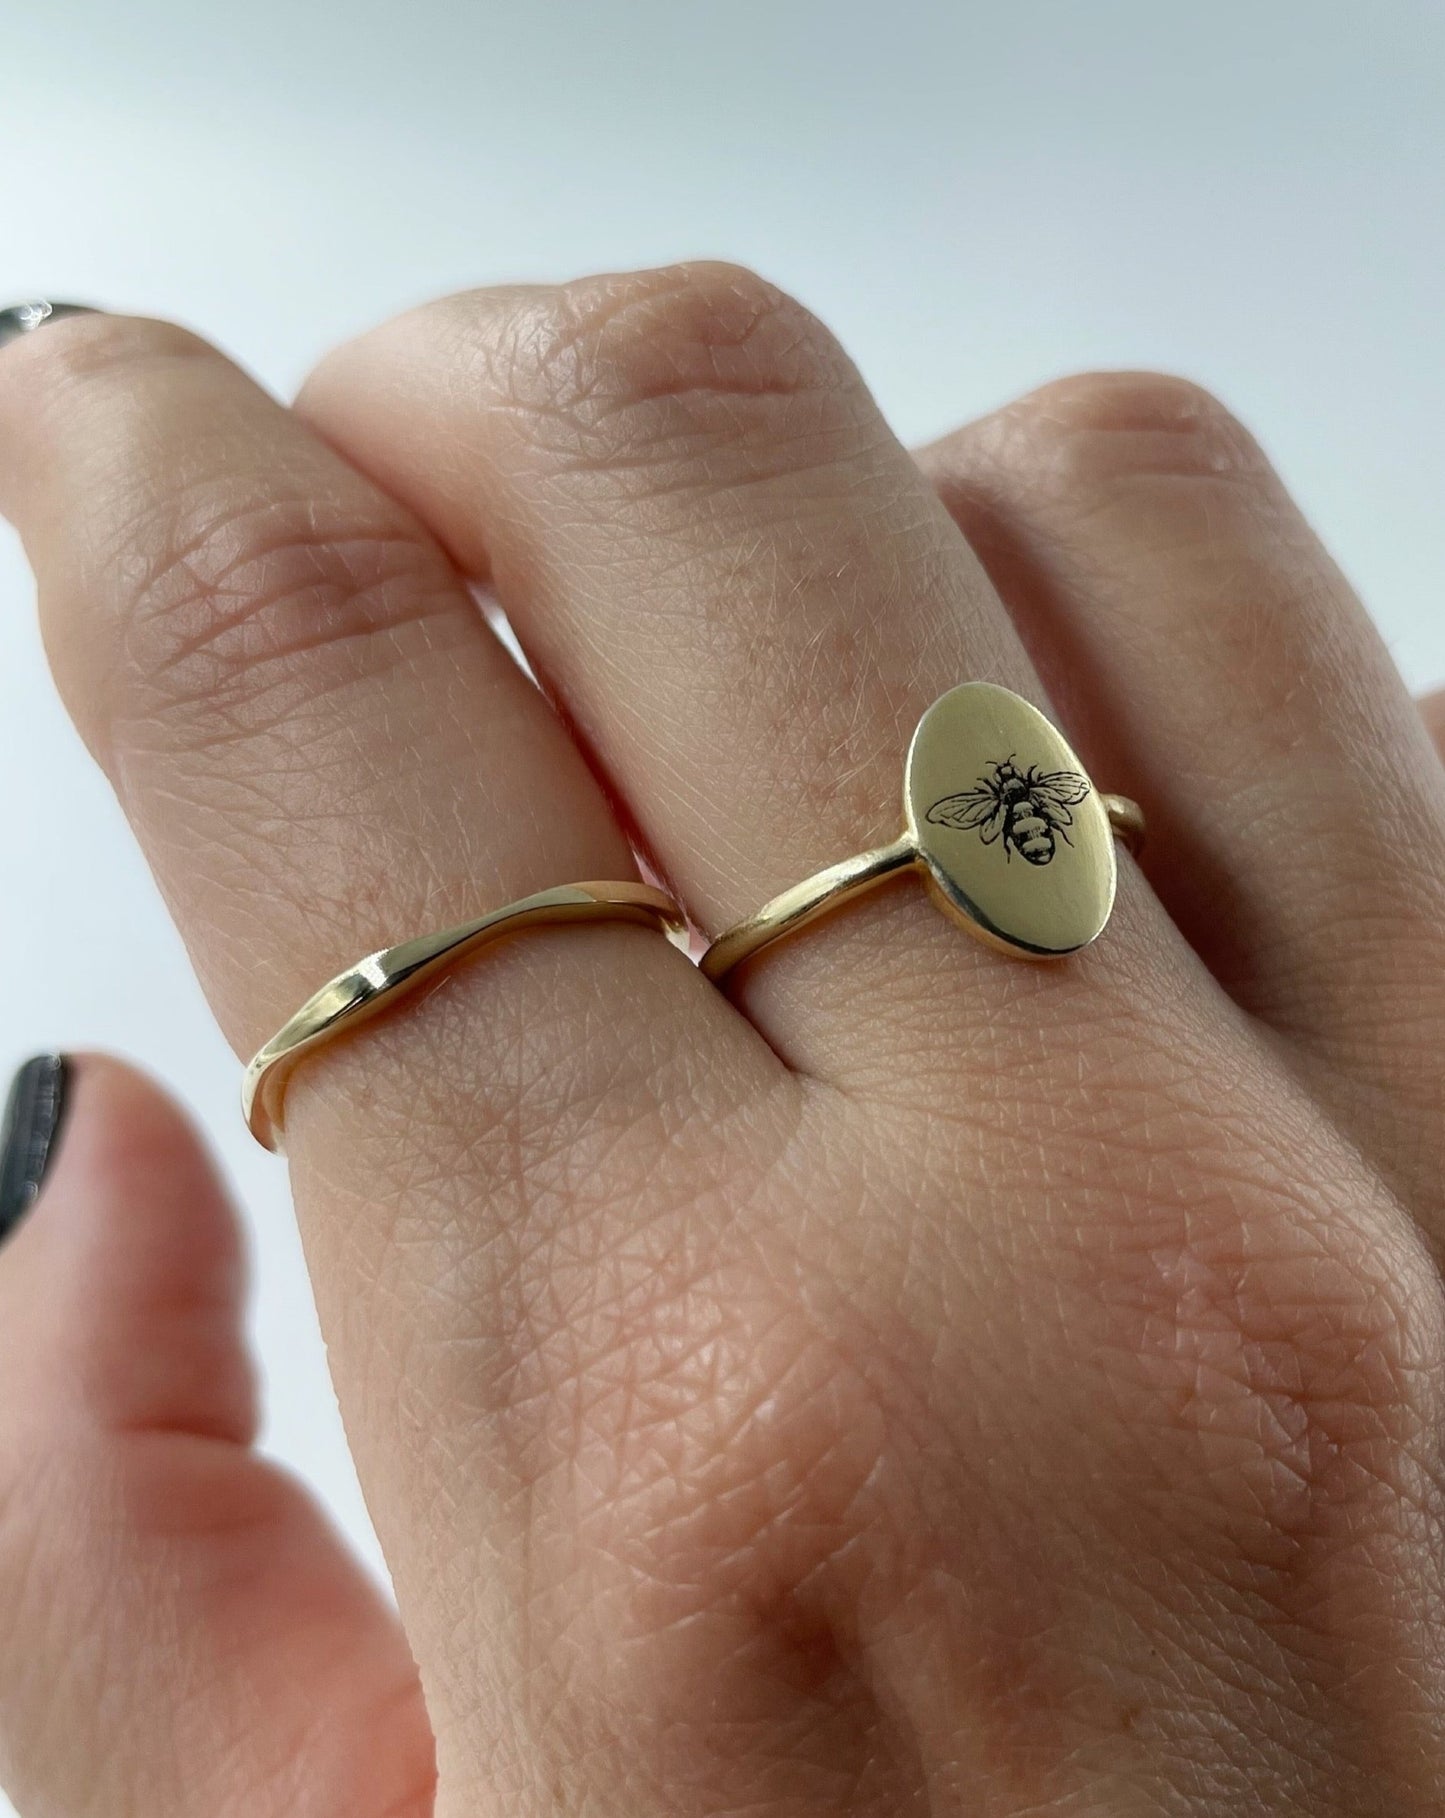 9ct wobble ring and 9ct gold bee ring shown on female hand